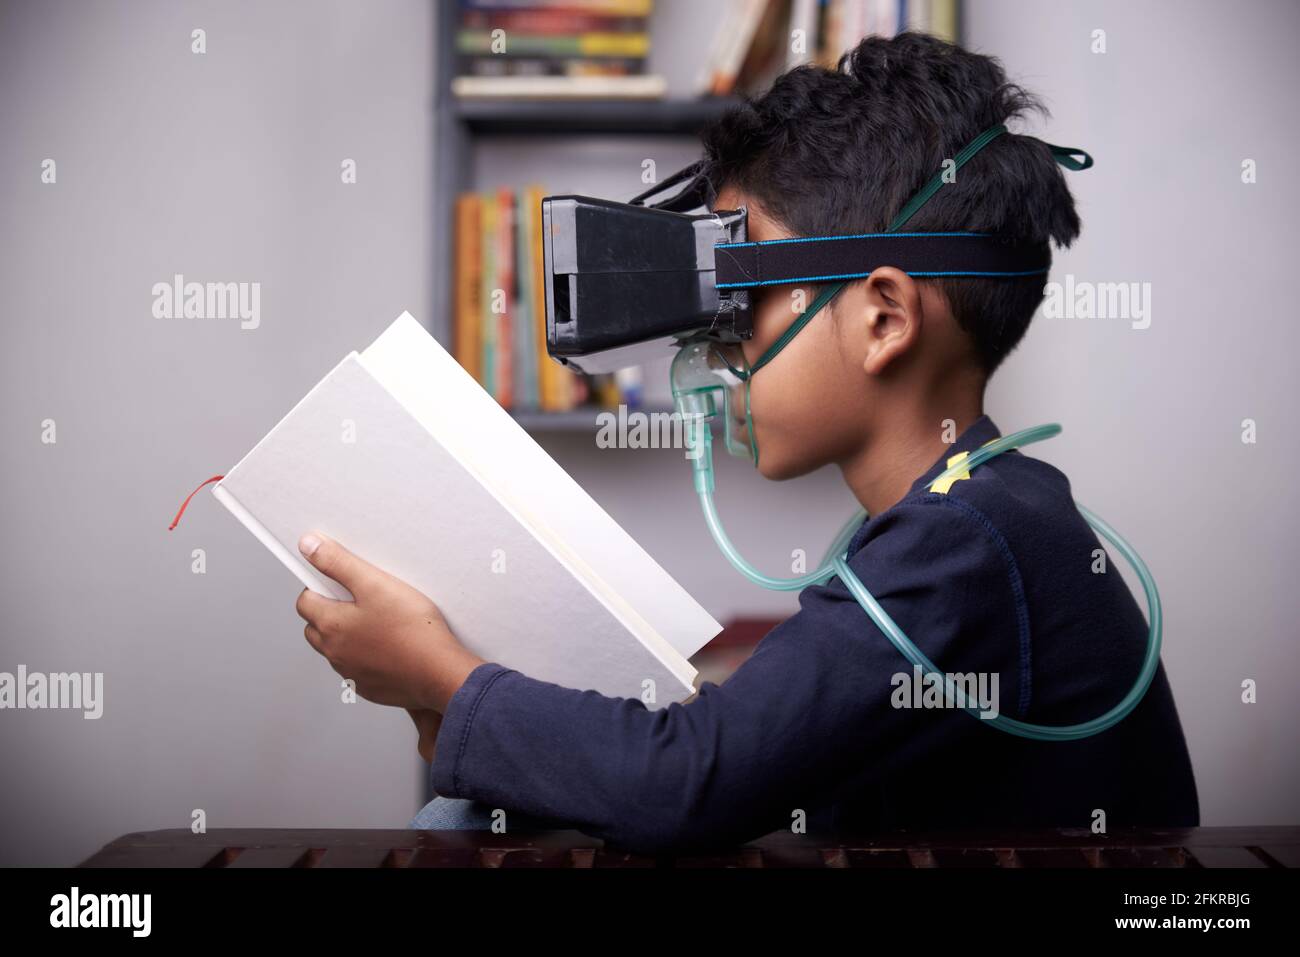 little Boy wearing VR headset and nebulizer mask studying at home quarantine Stock Photo